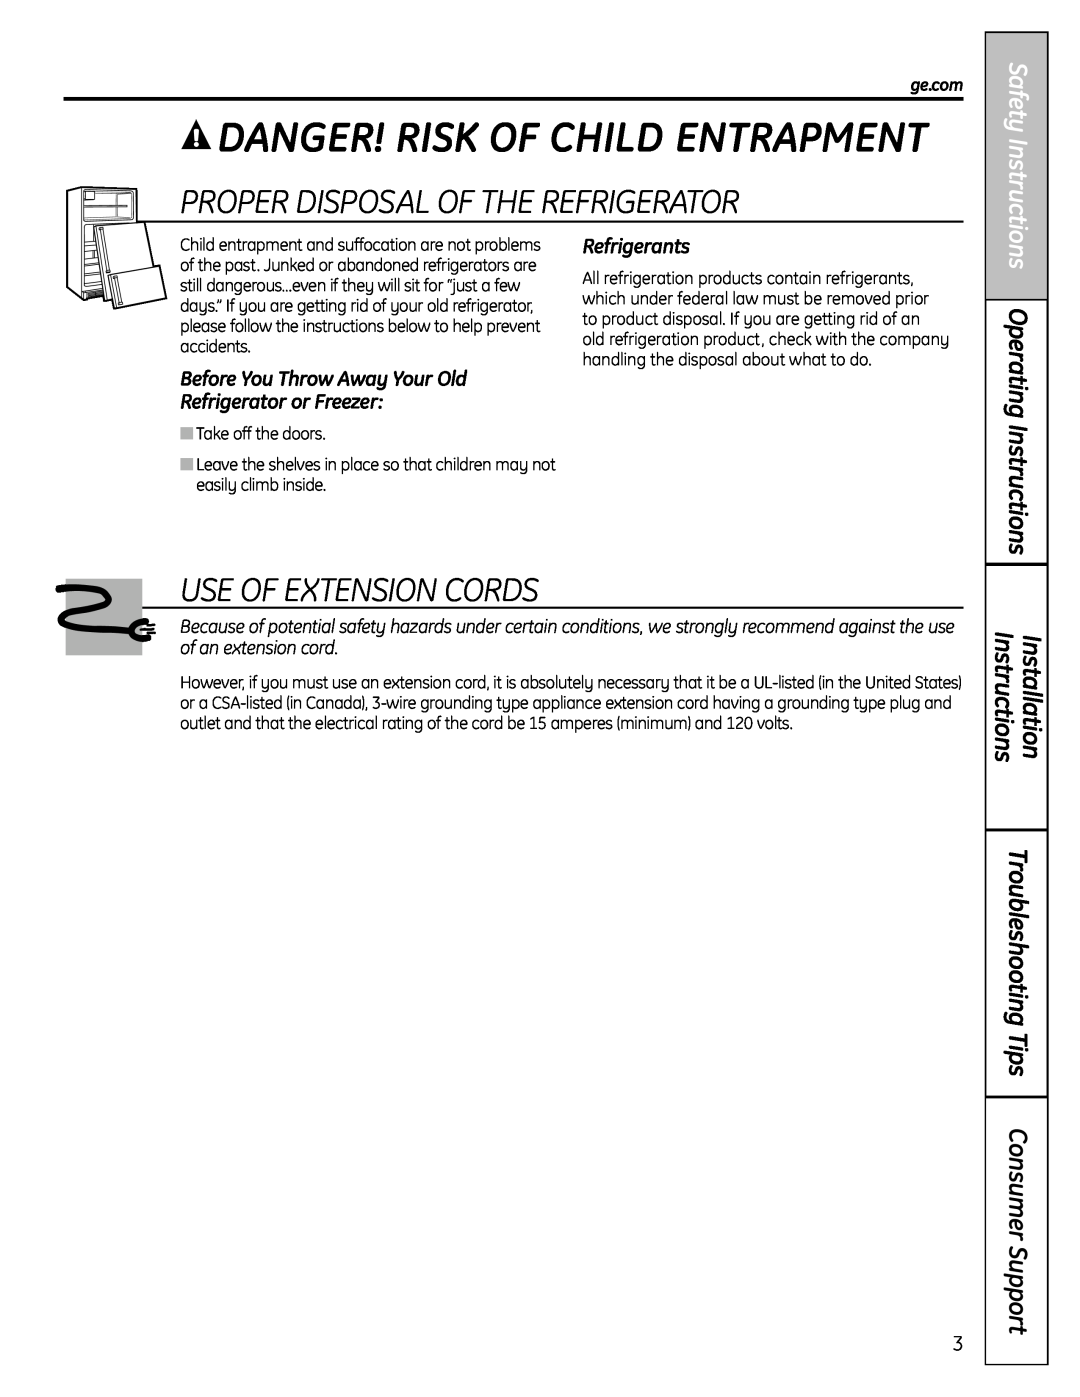 GE 25, 26 Proper Disposal Of The Refrigerator, Use Of Extension Cords, Safety Instructions Operating Instructions, ge.com 